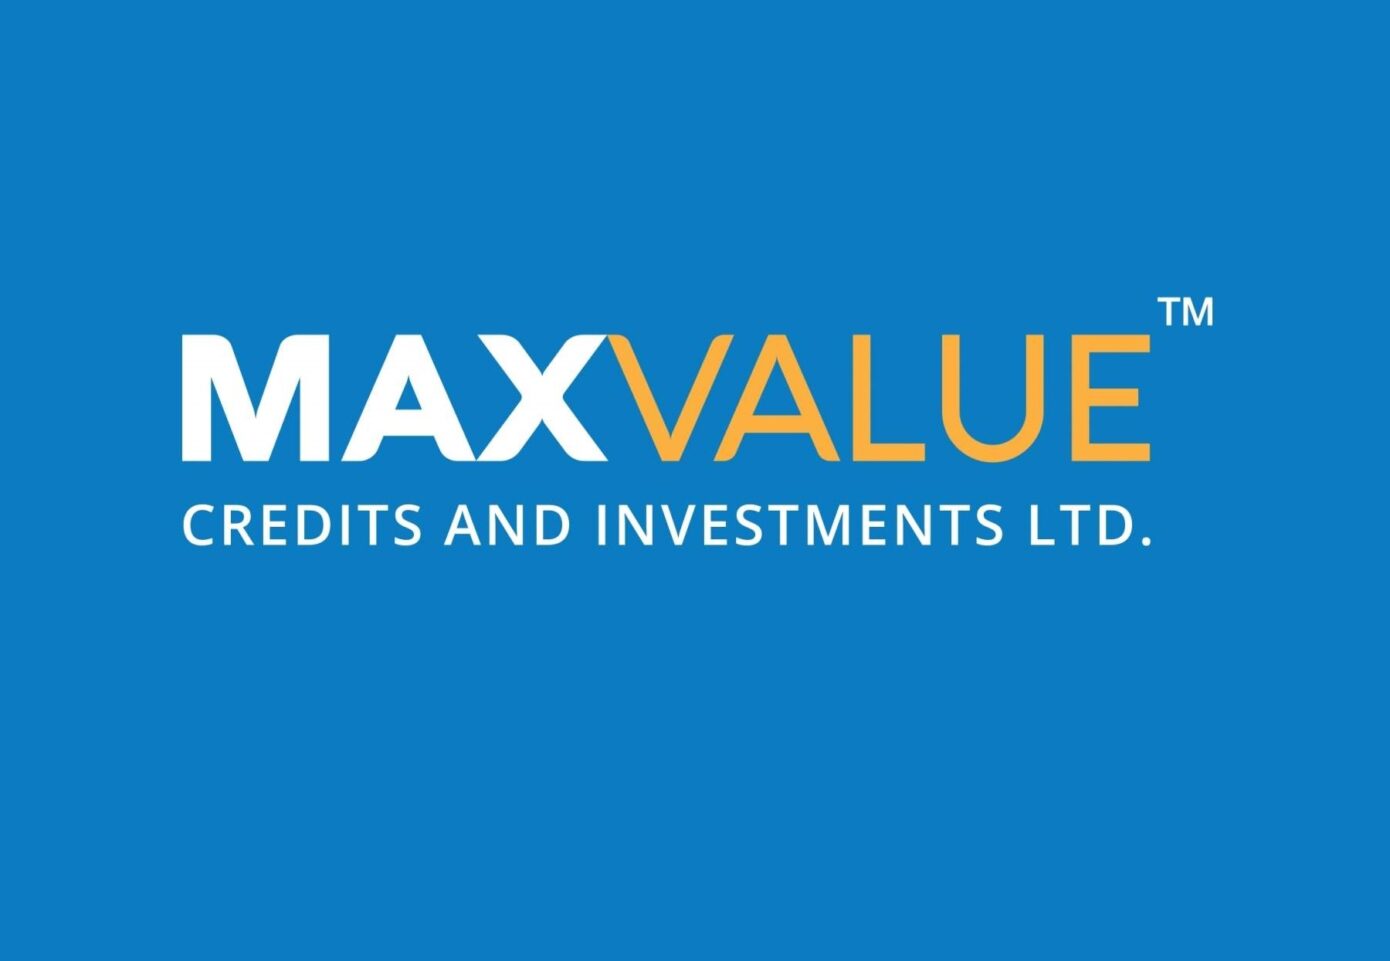 Share max. Макс кредит. MAXVALUE. Max credit.